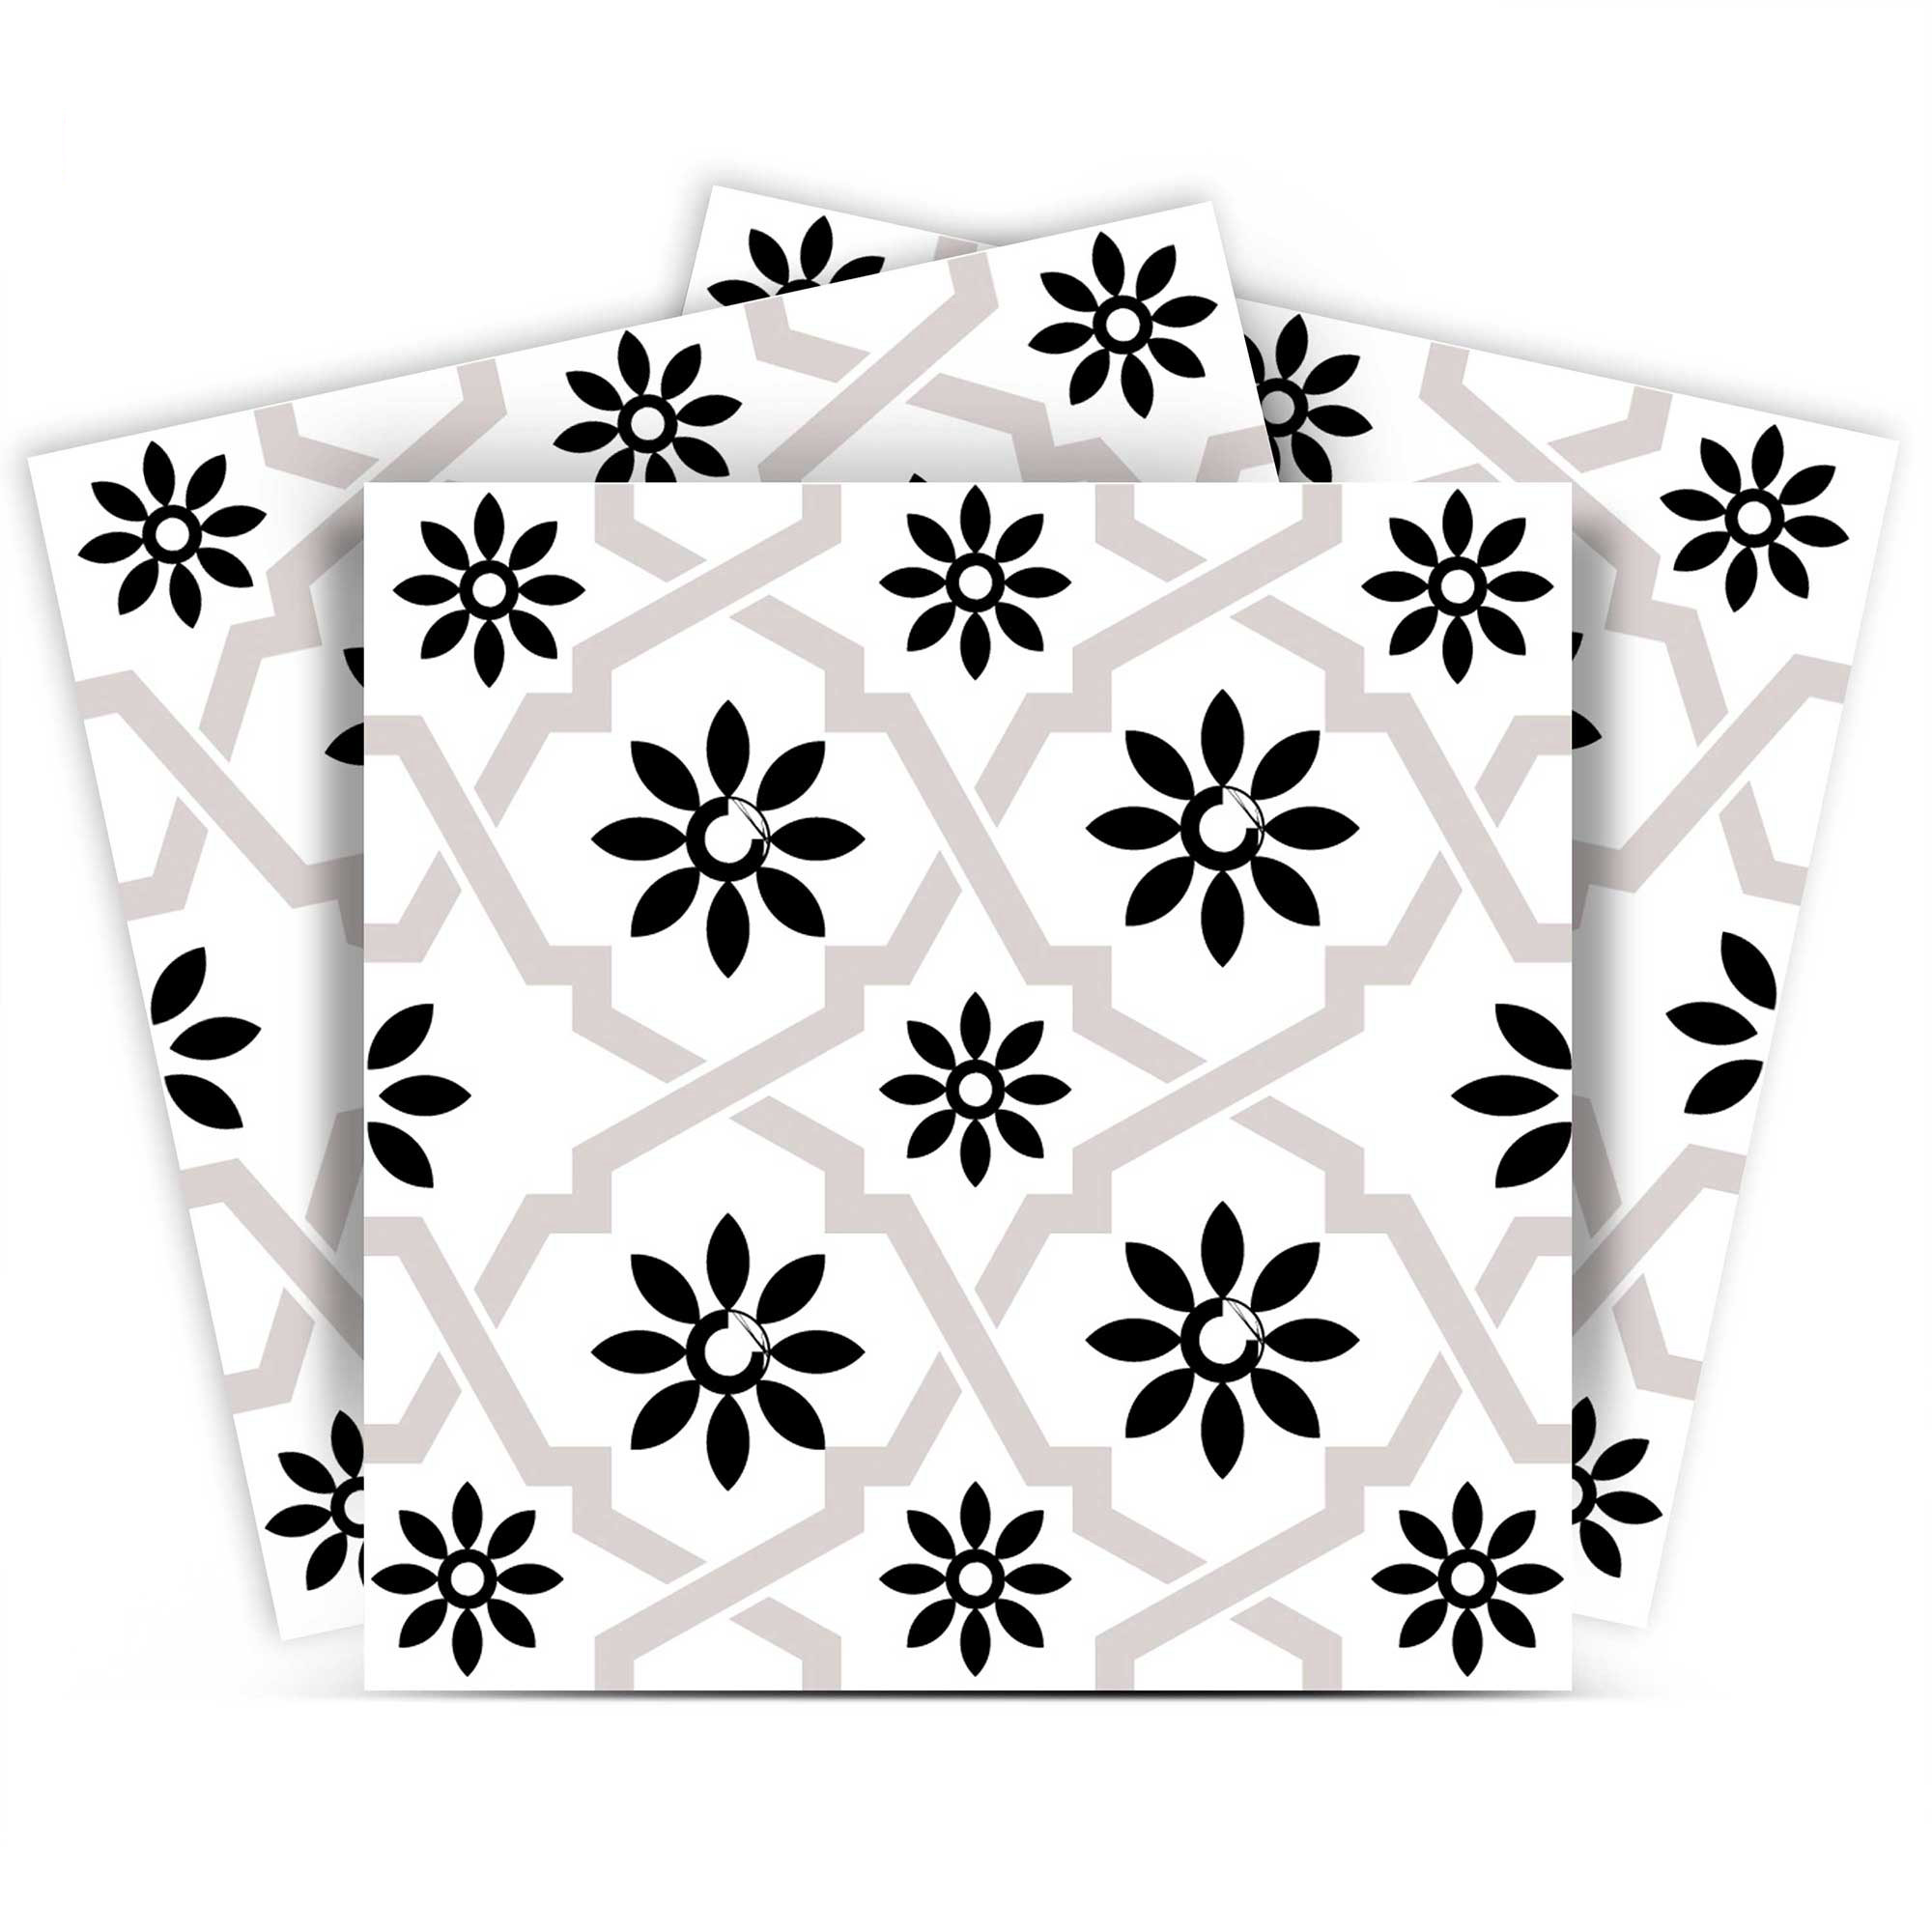 5" X 5" Black and White Lil Daisy Peel and Stick Removable Tiles-399906-1